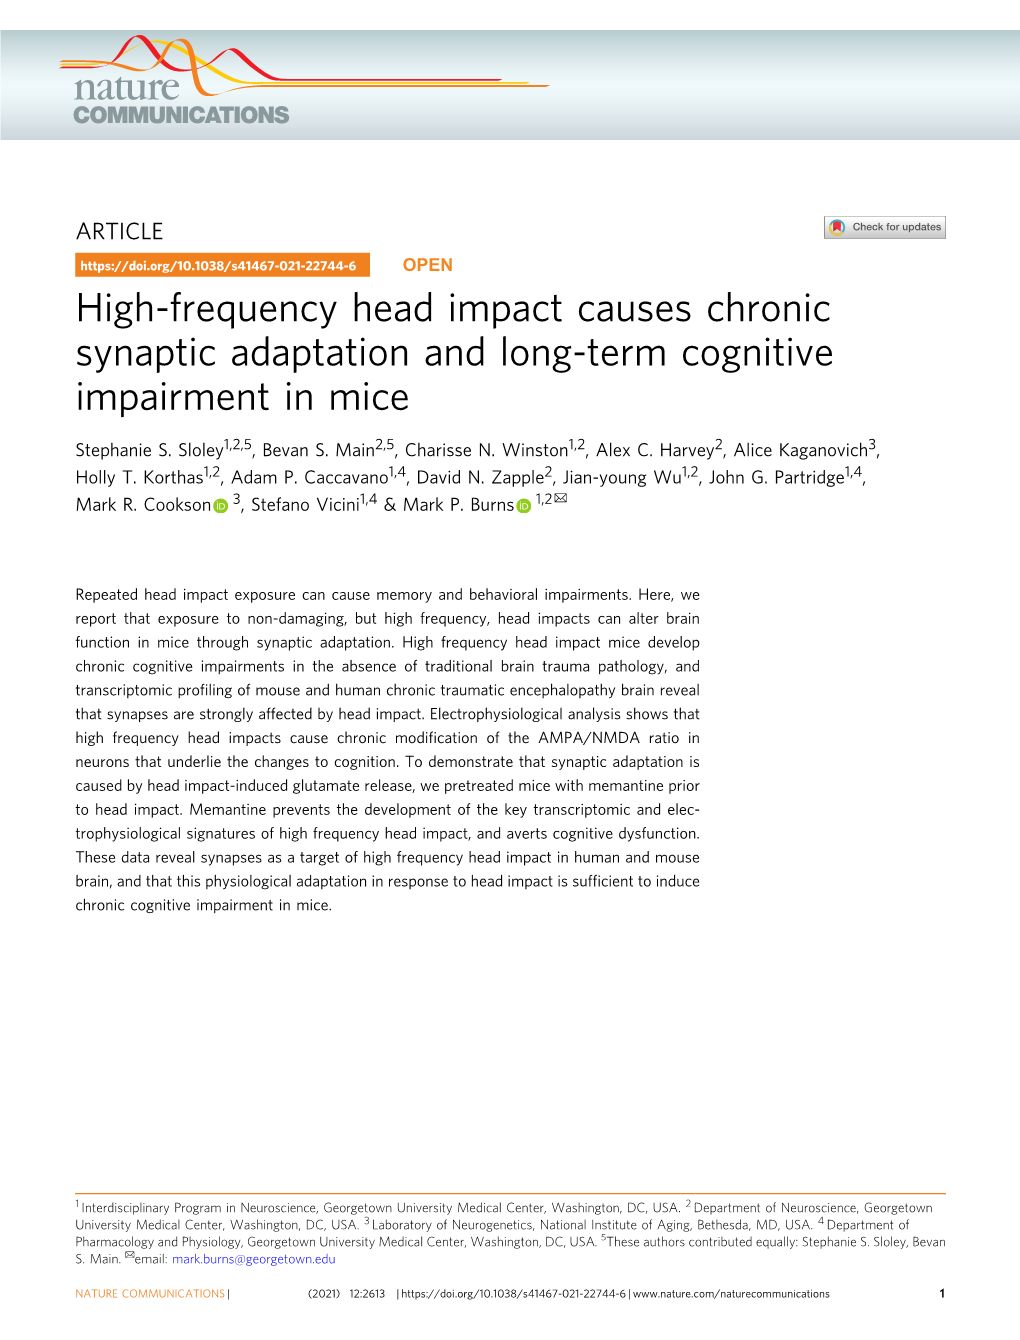 High-Frequency Head Impact Causes Chronic Synaptic Adaptation and Long-Term Cognitive Impairment in Mice